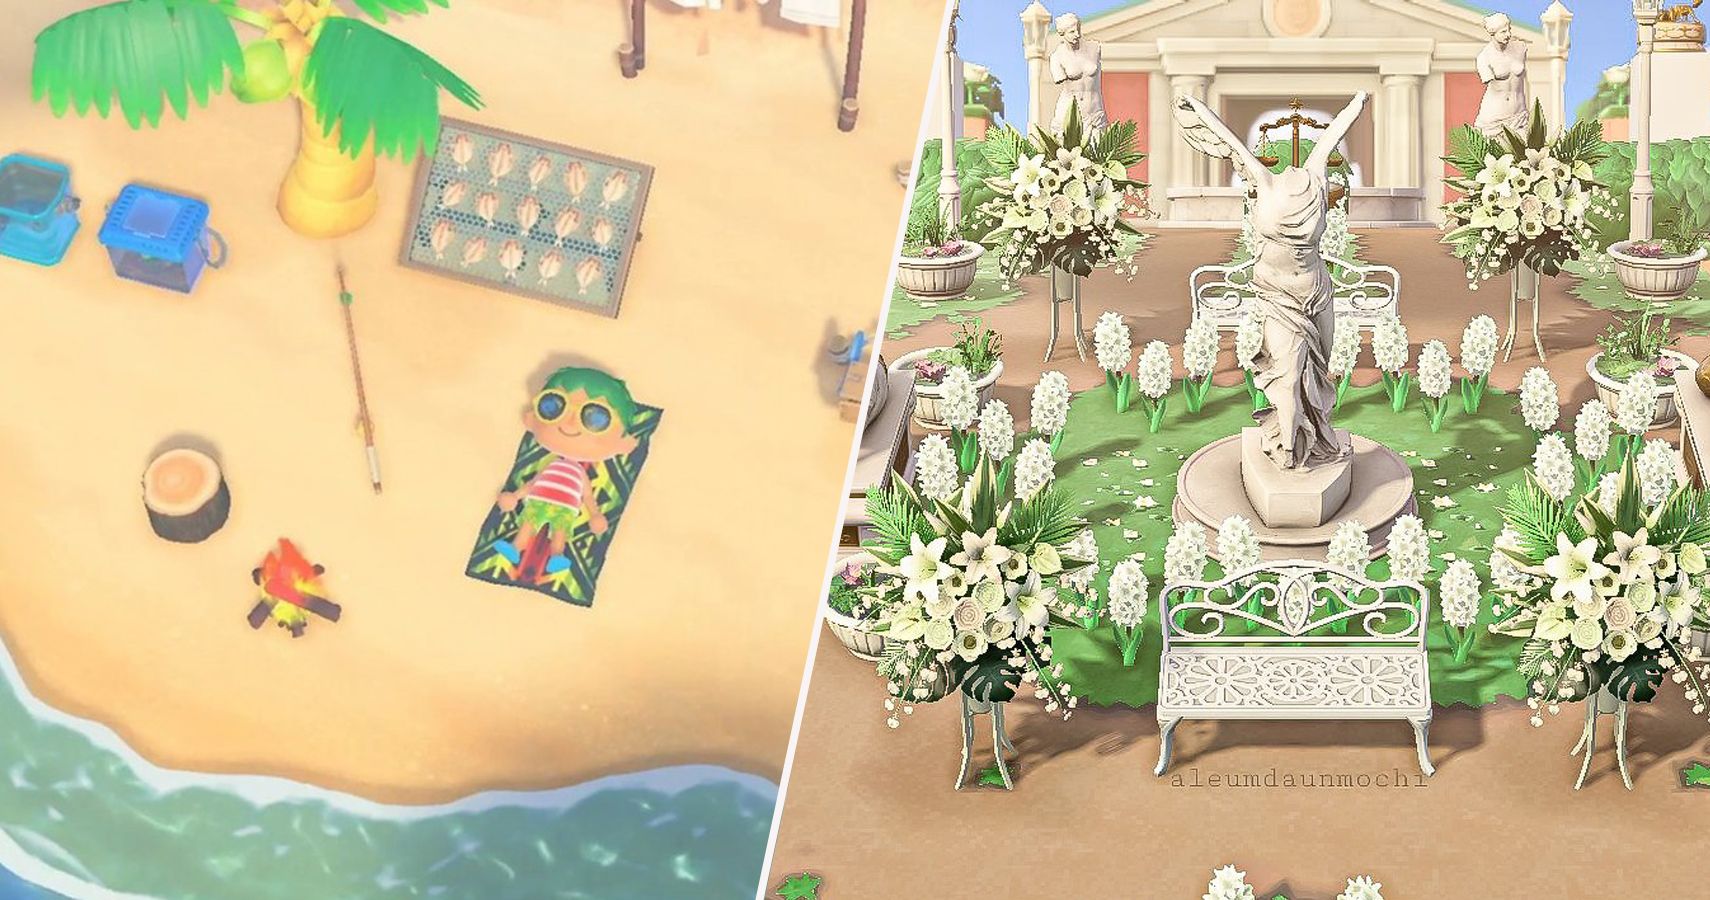 Animal Crossing New Horizons: 18 Cool Design Ideas For Your Island